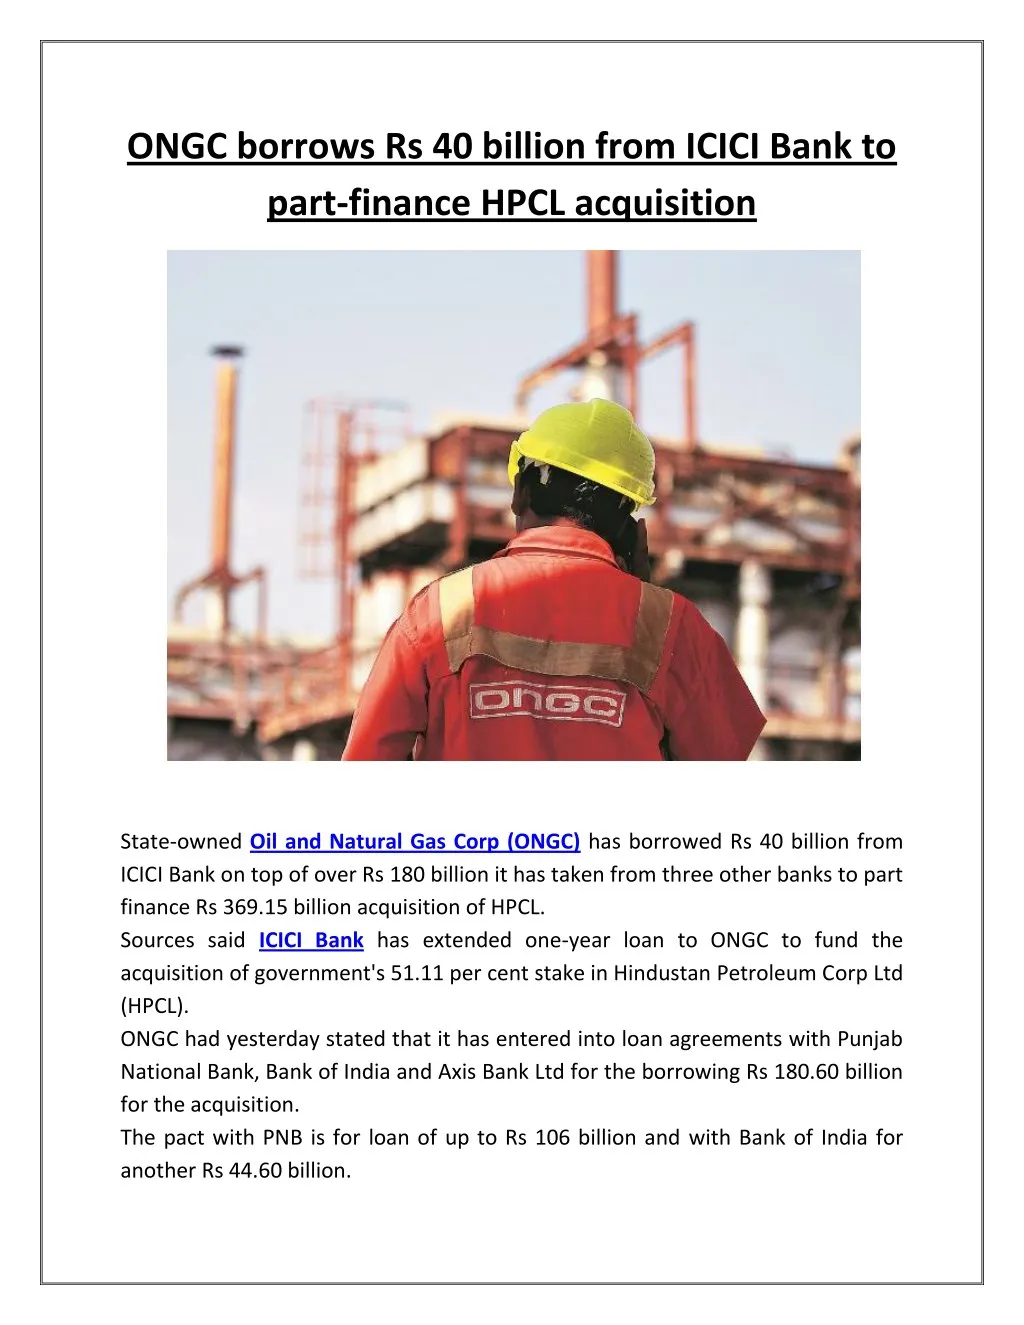 ongc borrows rs 40 billion from icici bank